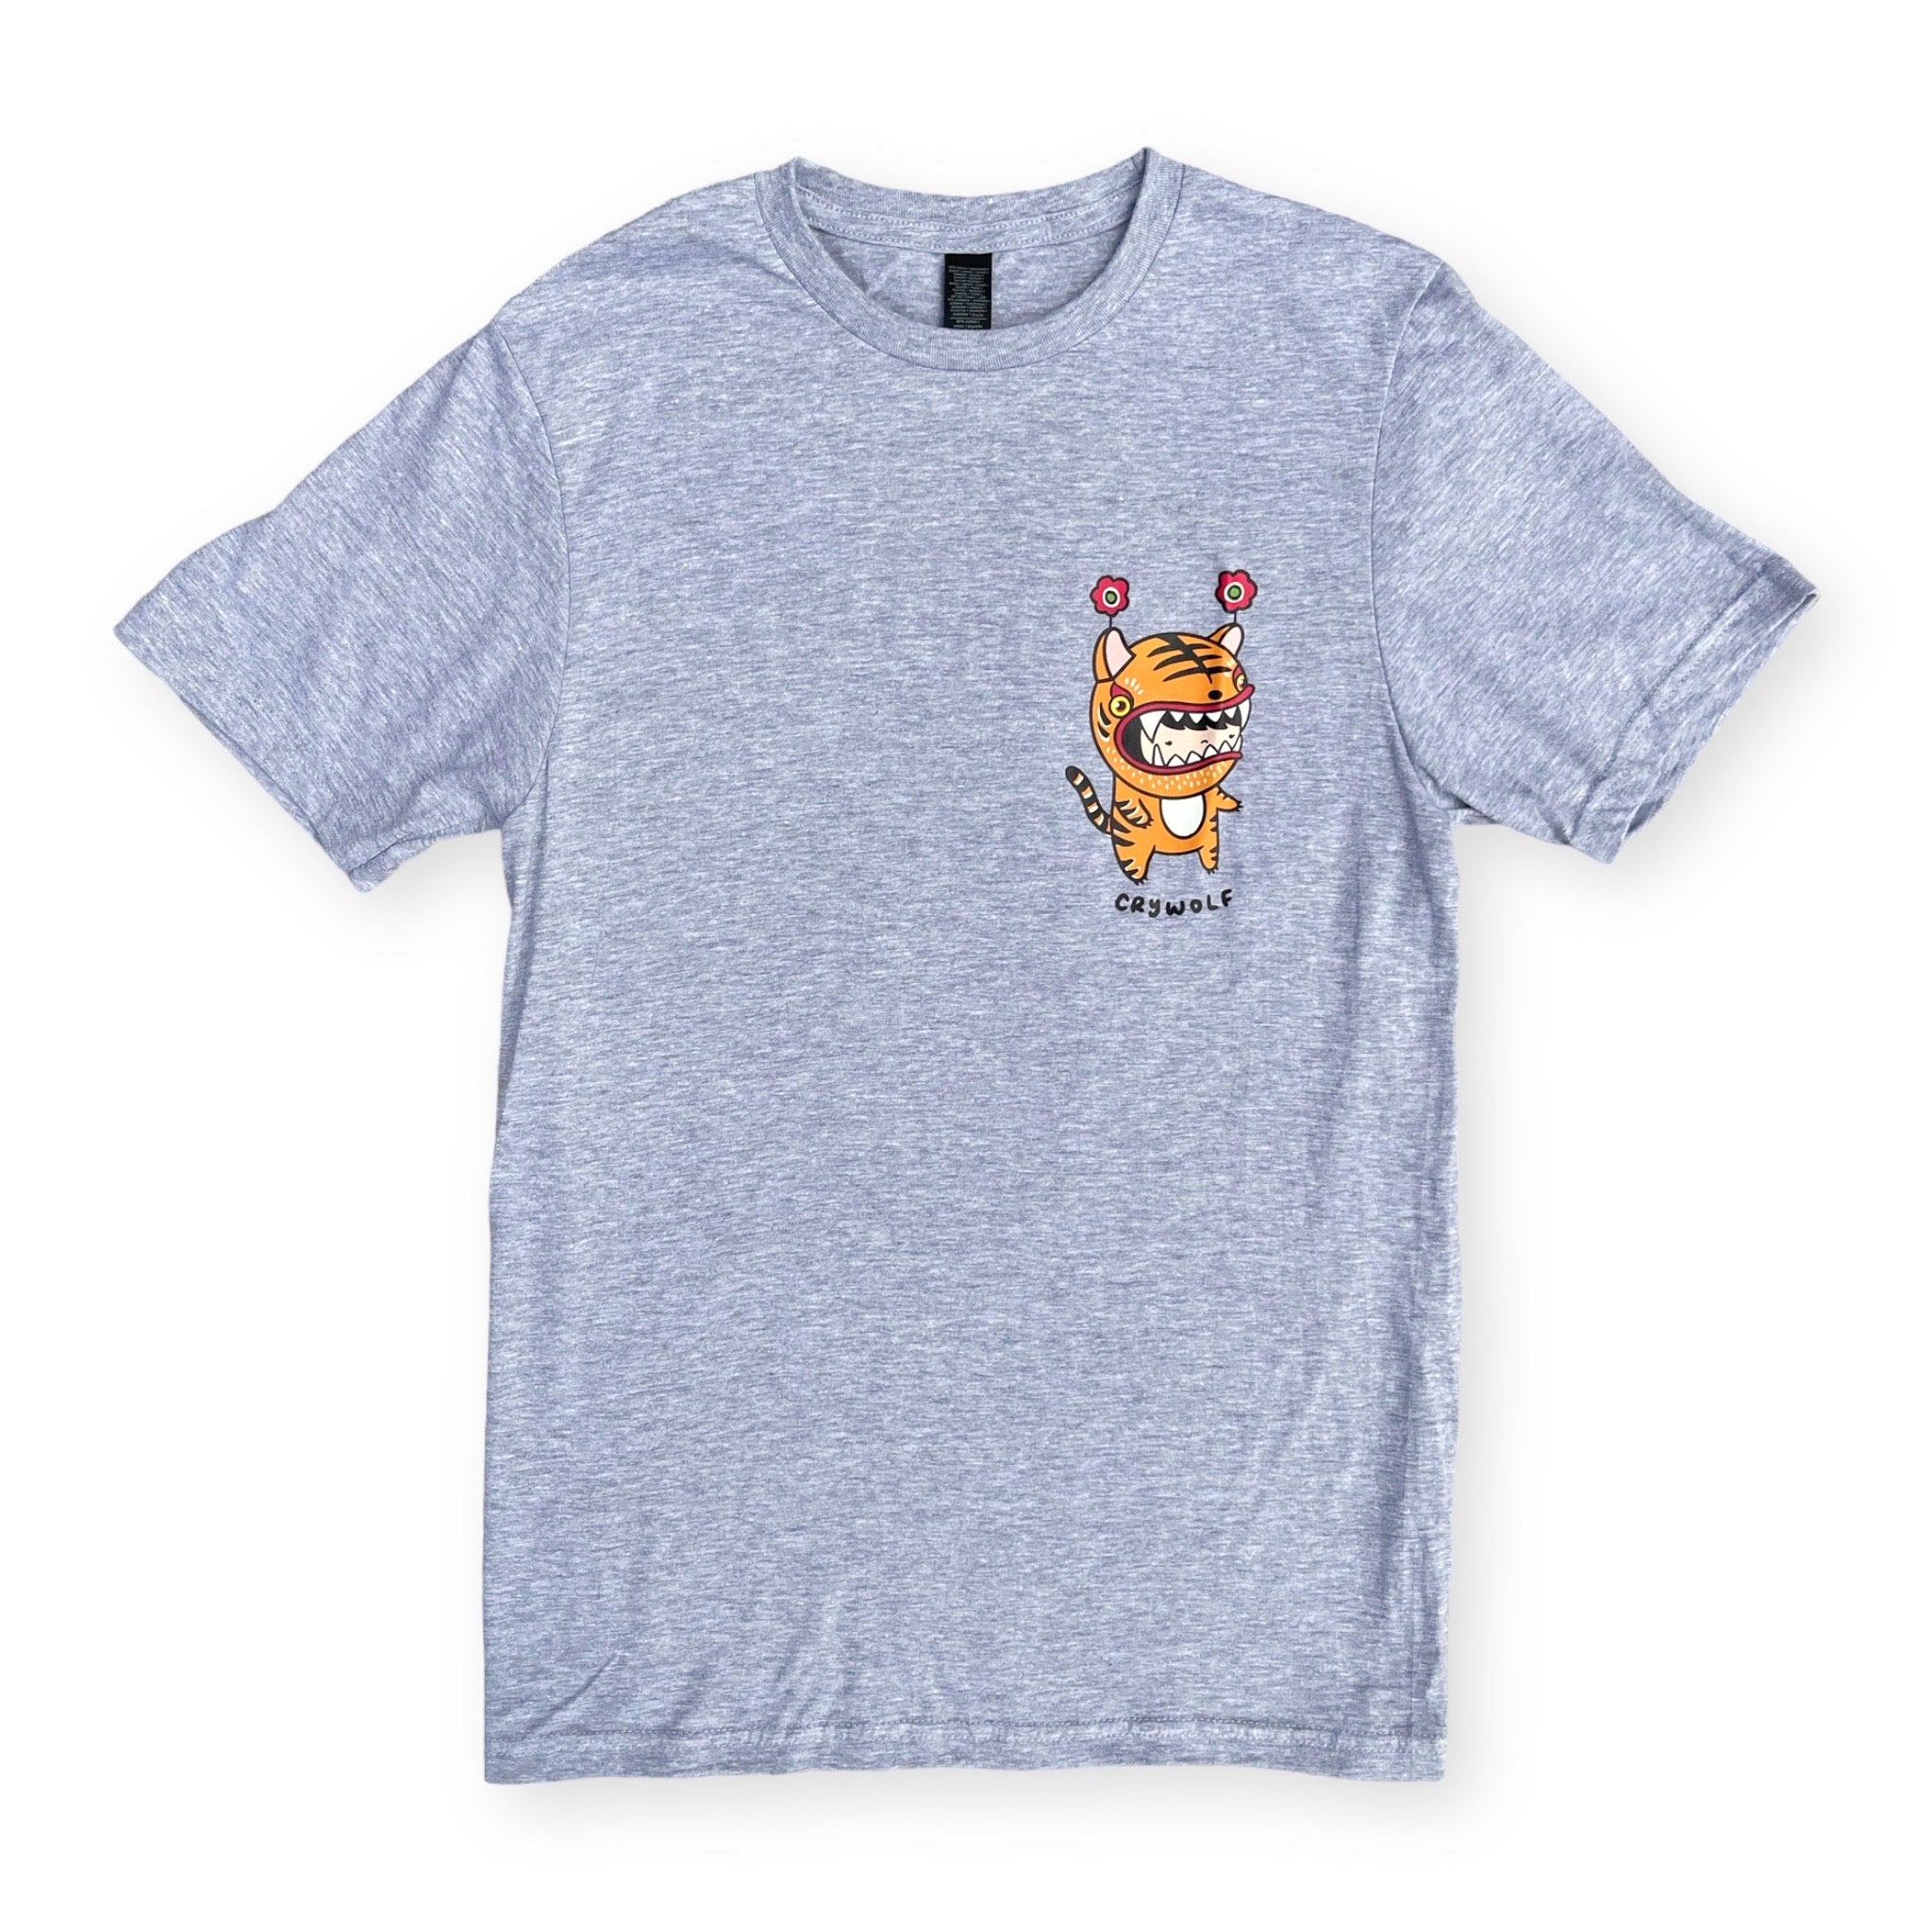 Year of the Tiger Tshirt